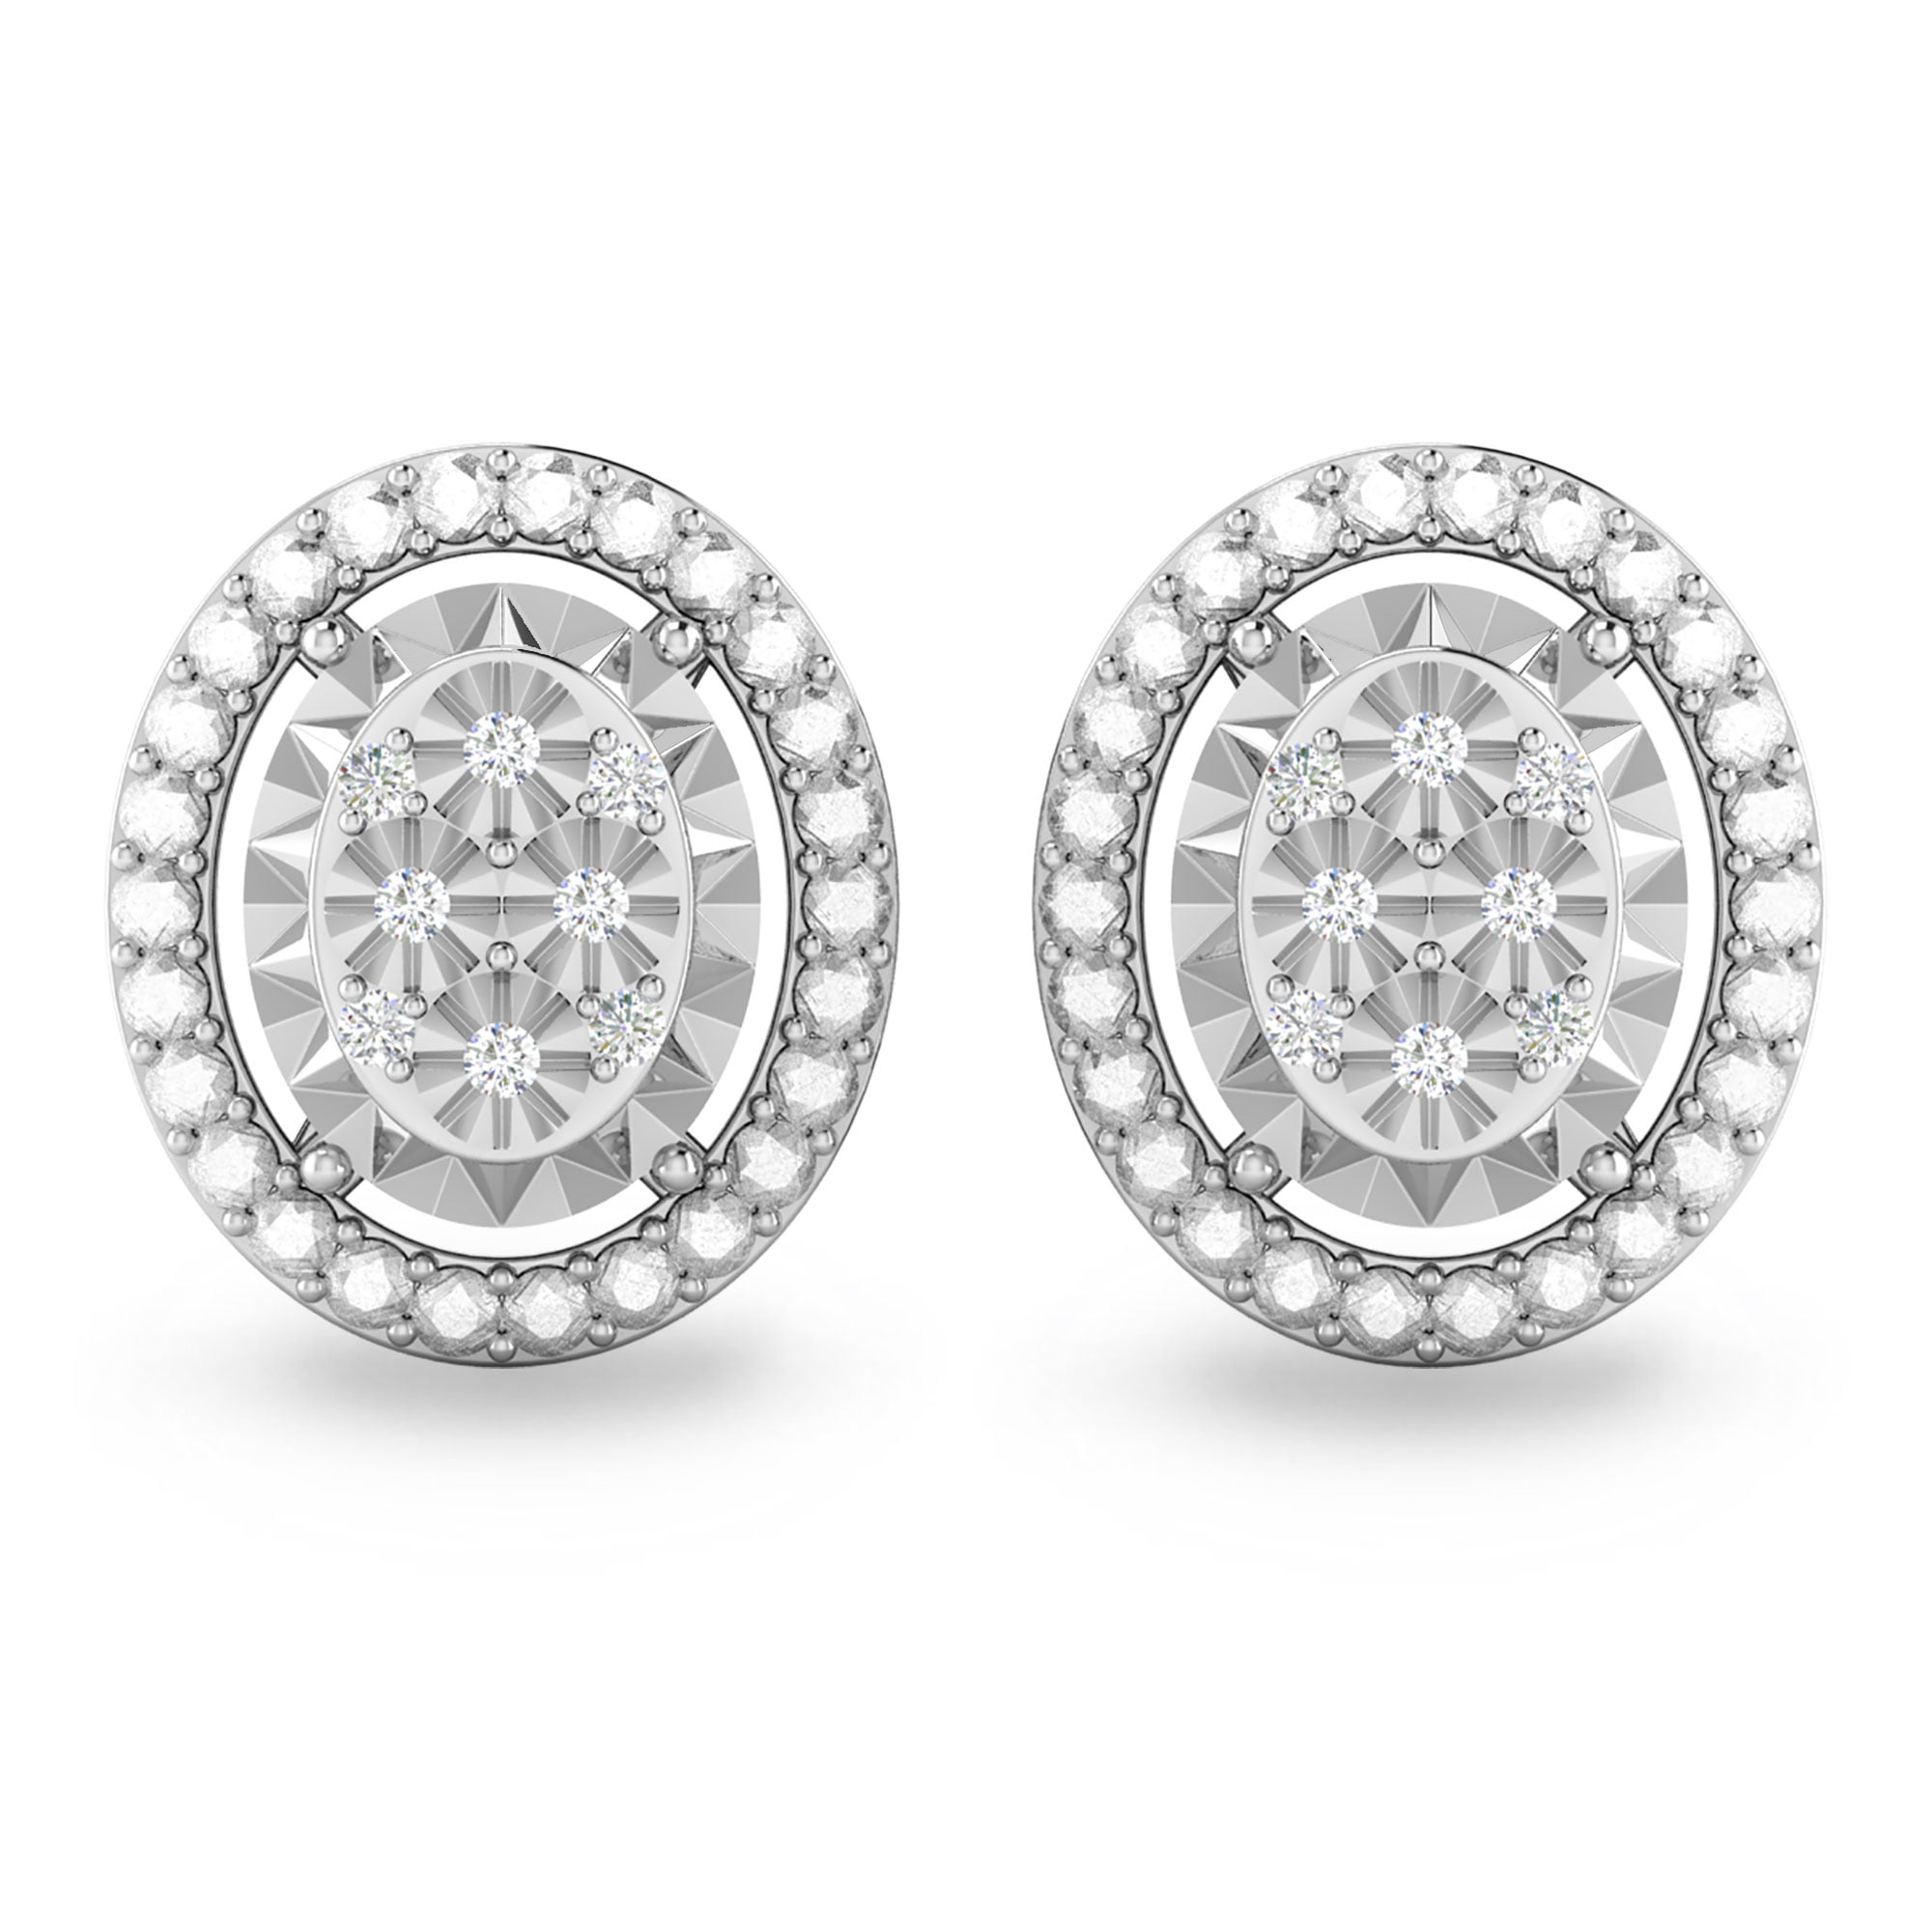 Diamond Accent 925 Sterling Silver Diamond Composite Style Cluster Stud Earrings For Women (I-J Color, I3 Clarity)